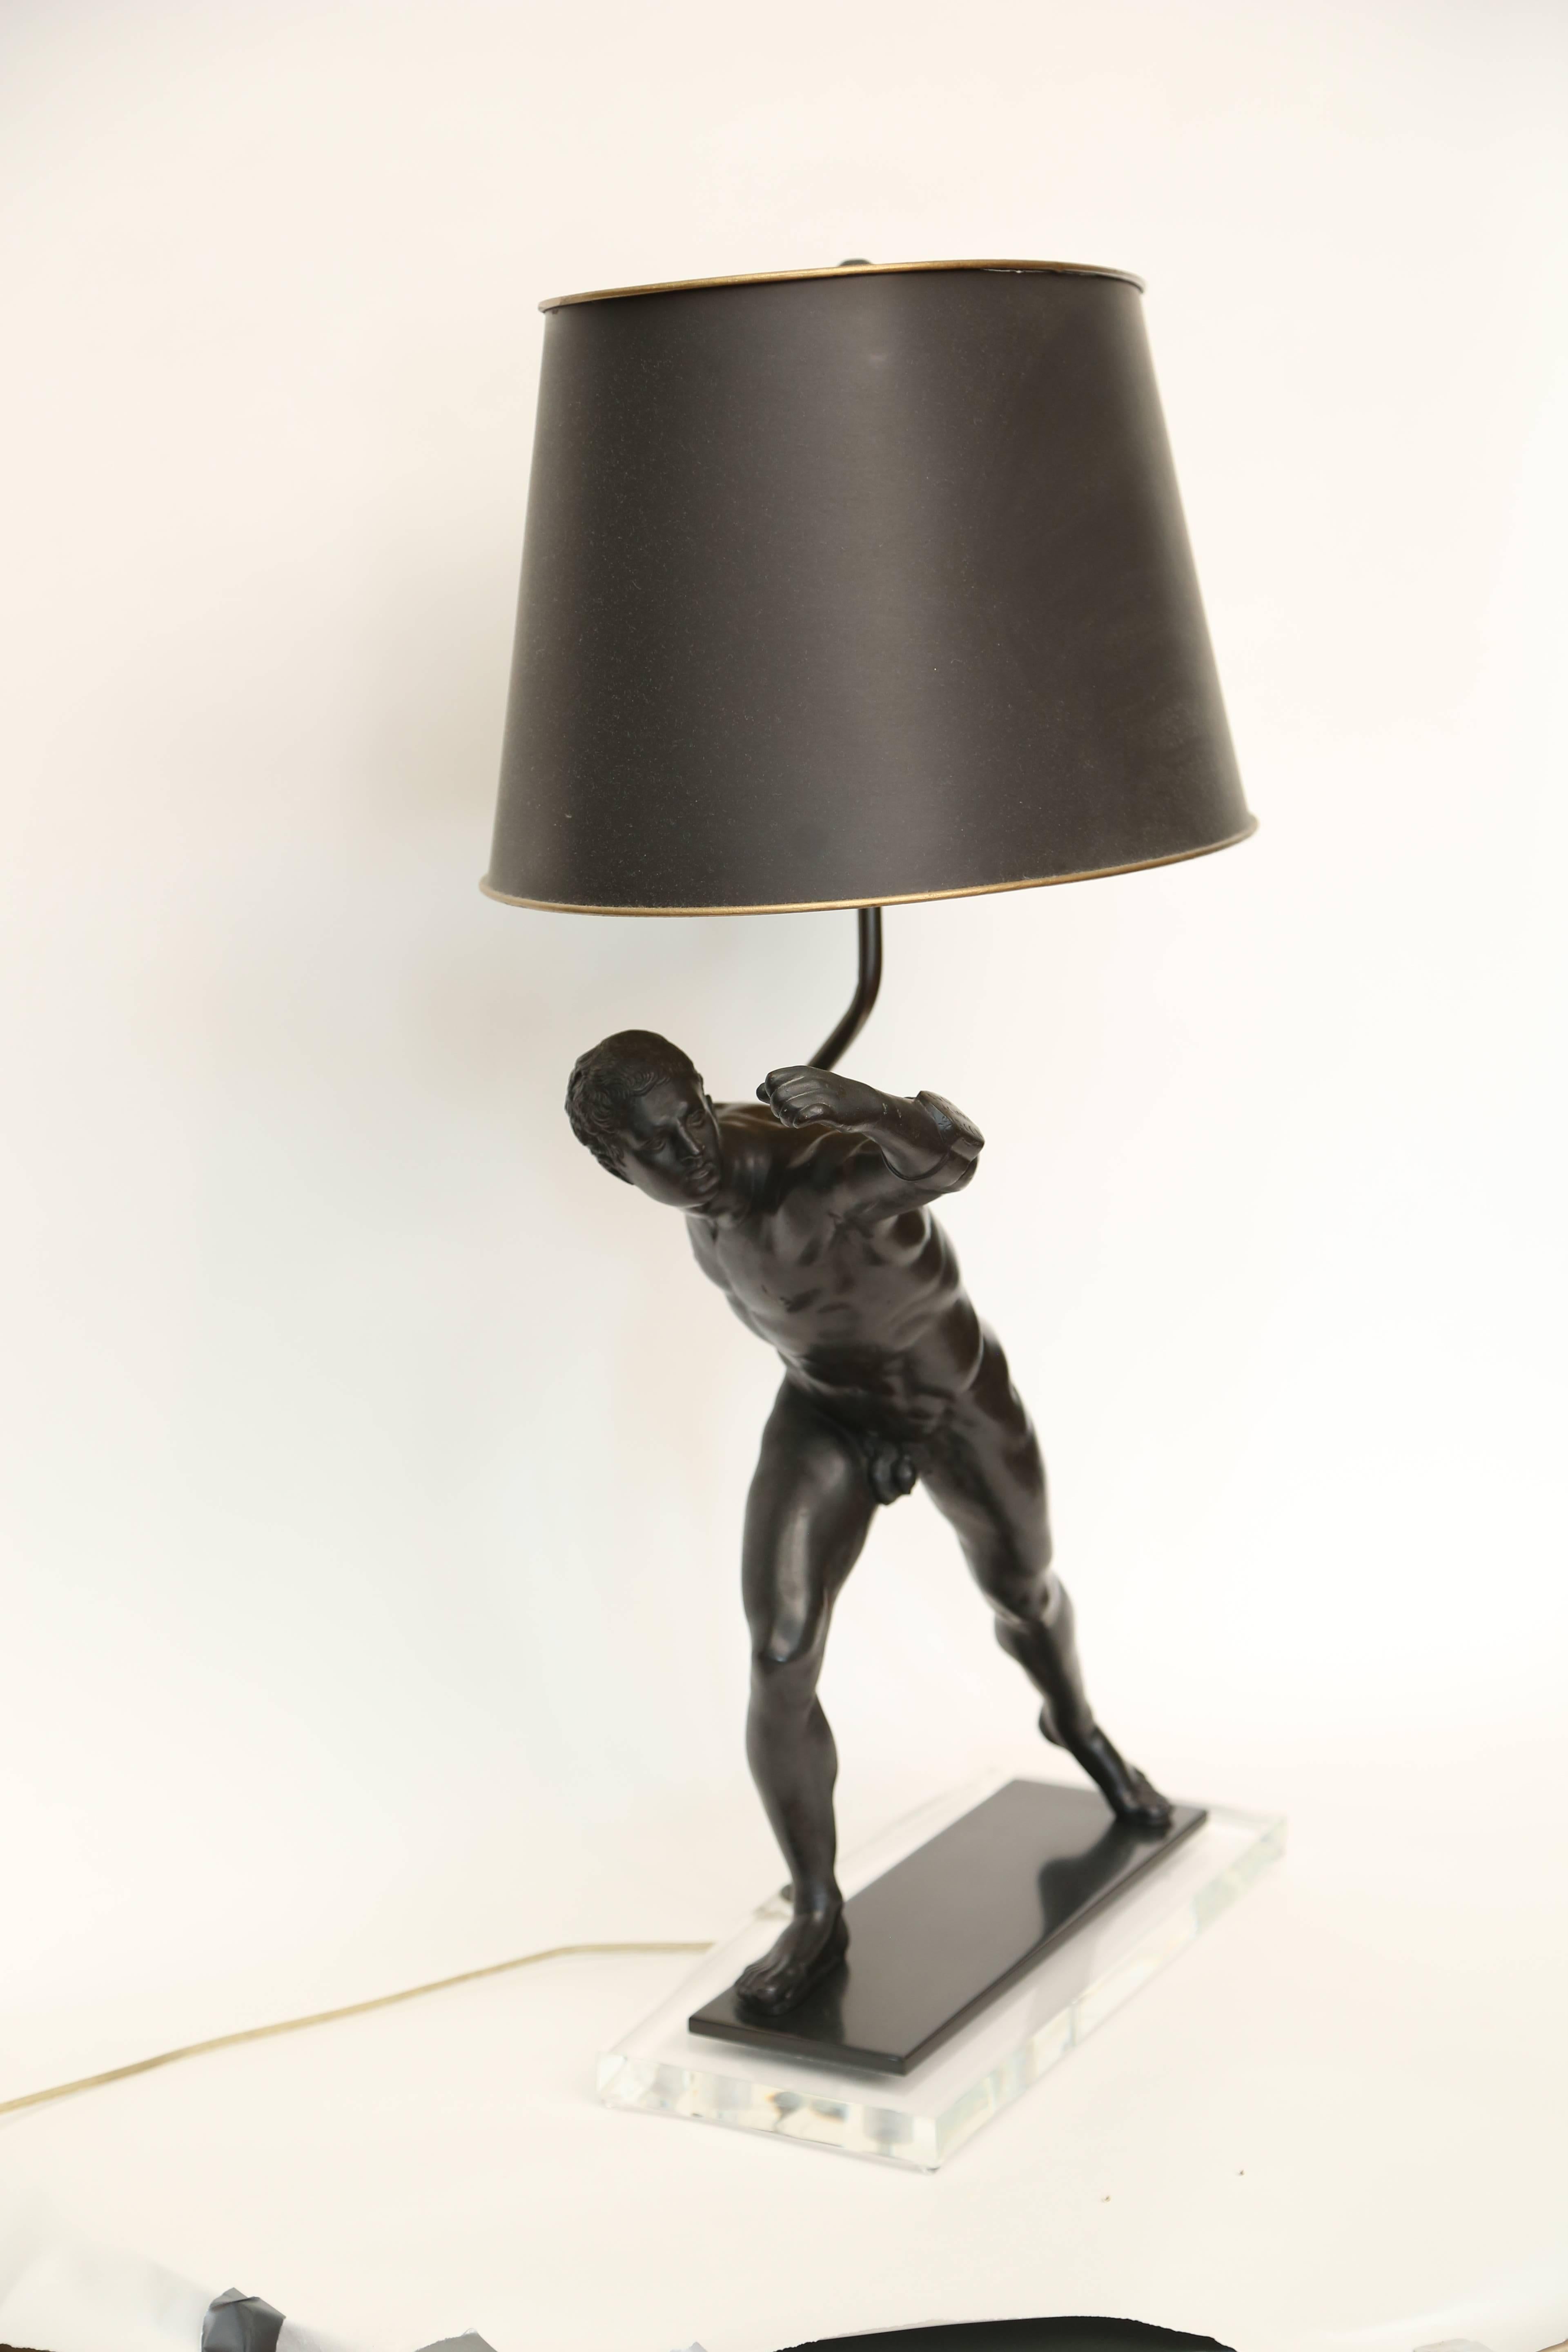 Carved wood sculpture expertly painted to look like bronze and later mounted as a lamp. Inscribed CVQPC / McVCMC / SPCCN. Mounted on a Lucite base. Figure itself measures 17 1/8